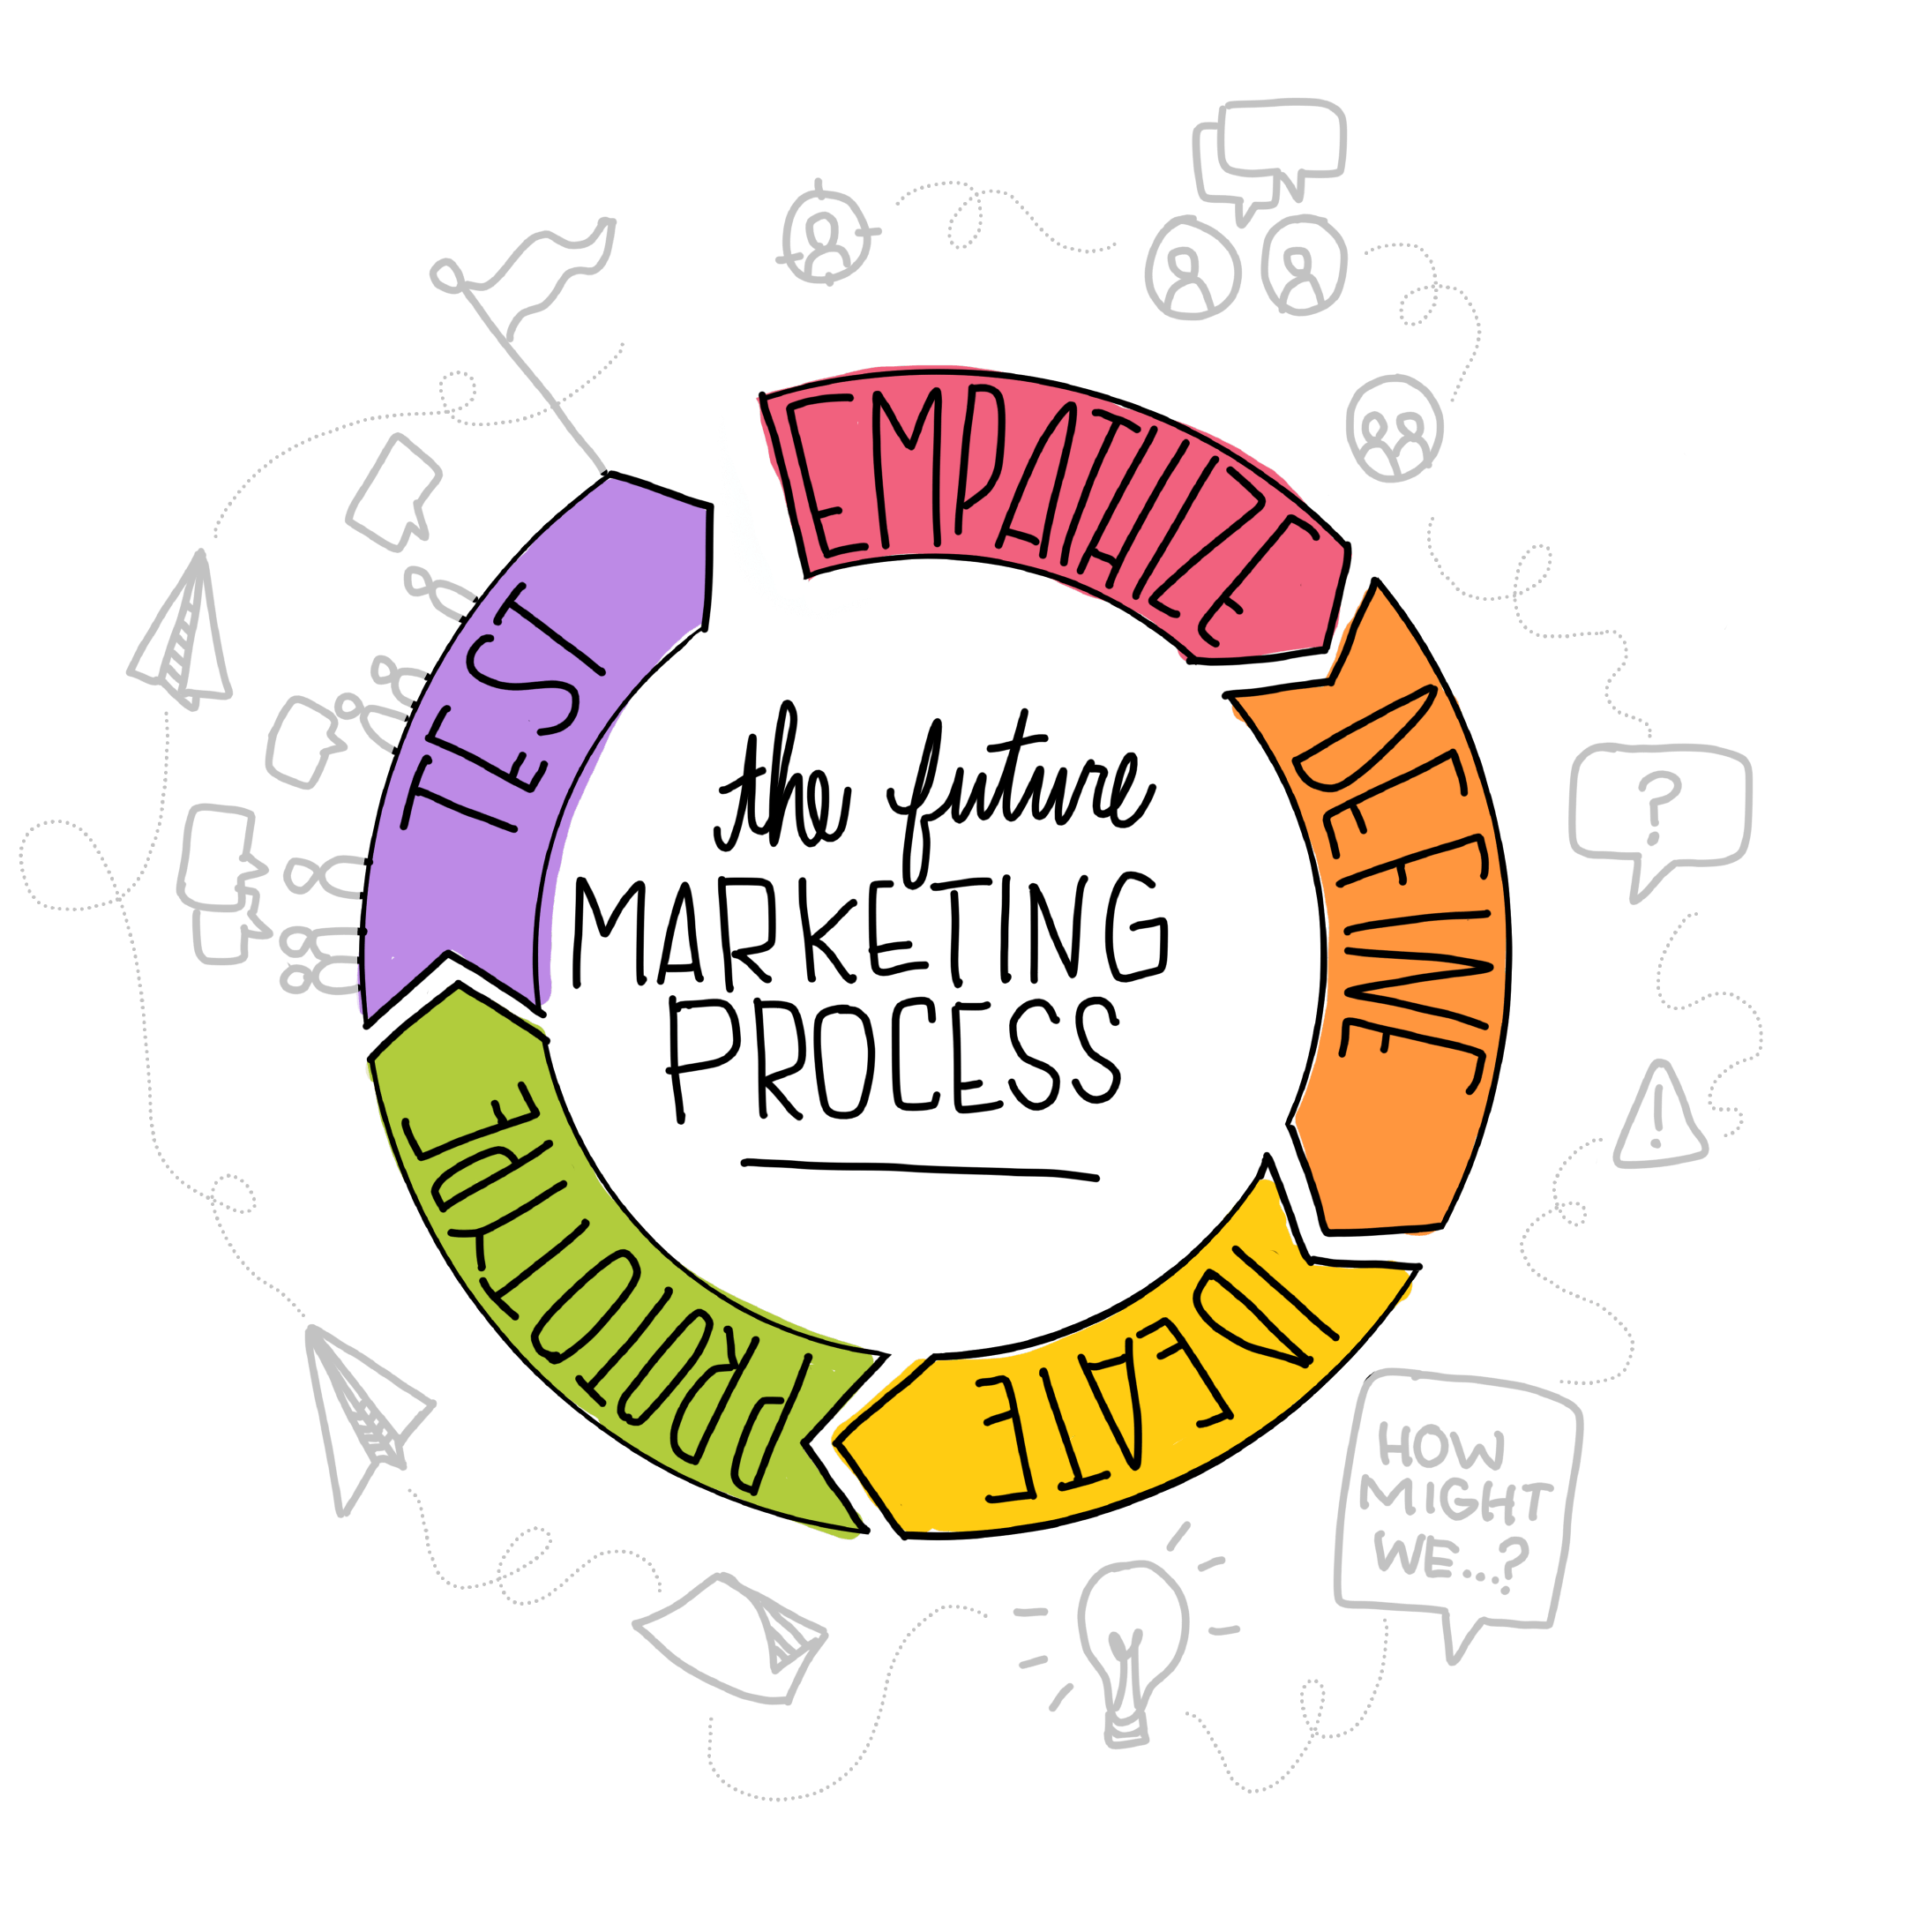 The future state of marketing with design thinking creates and